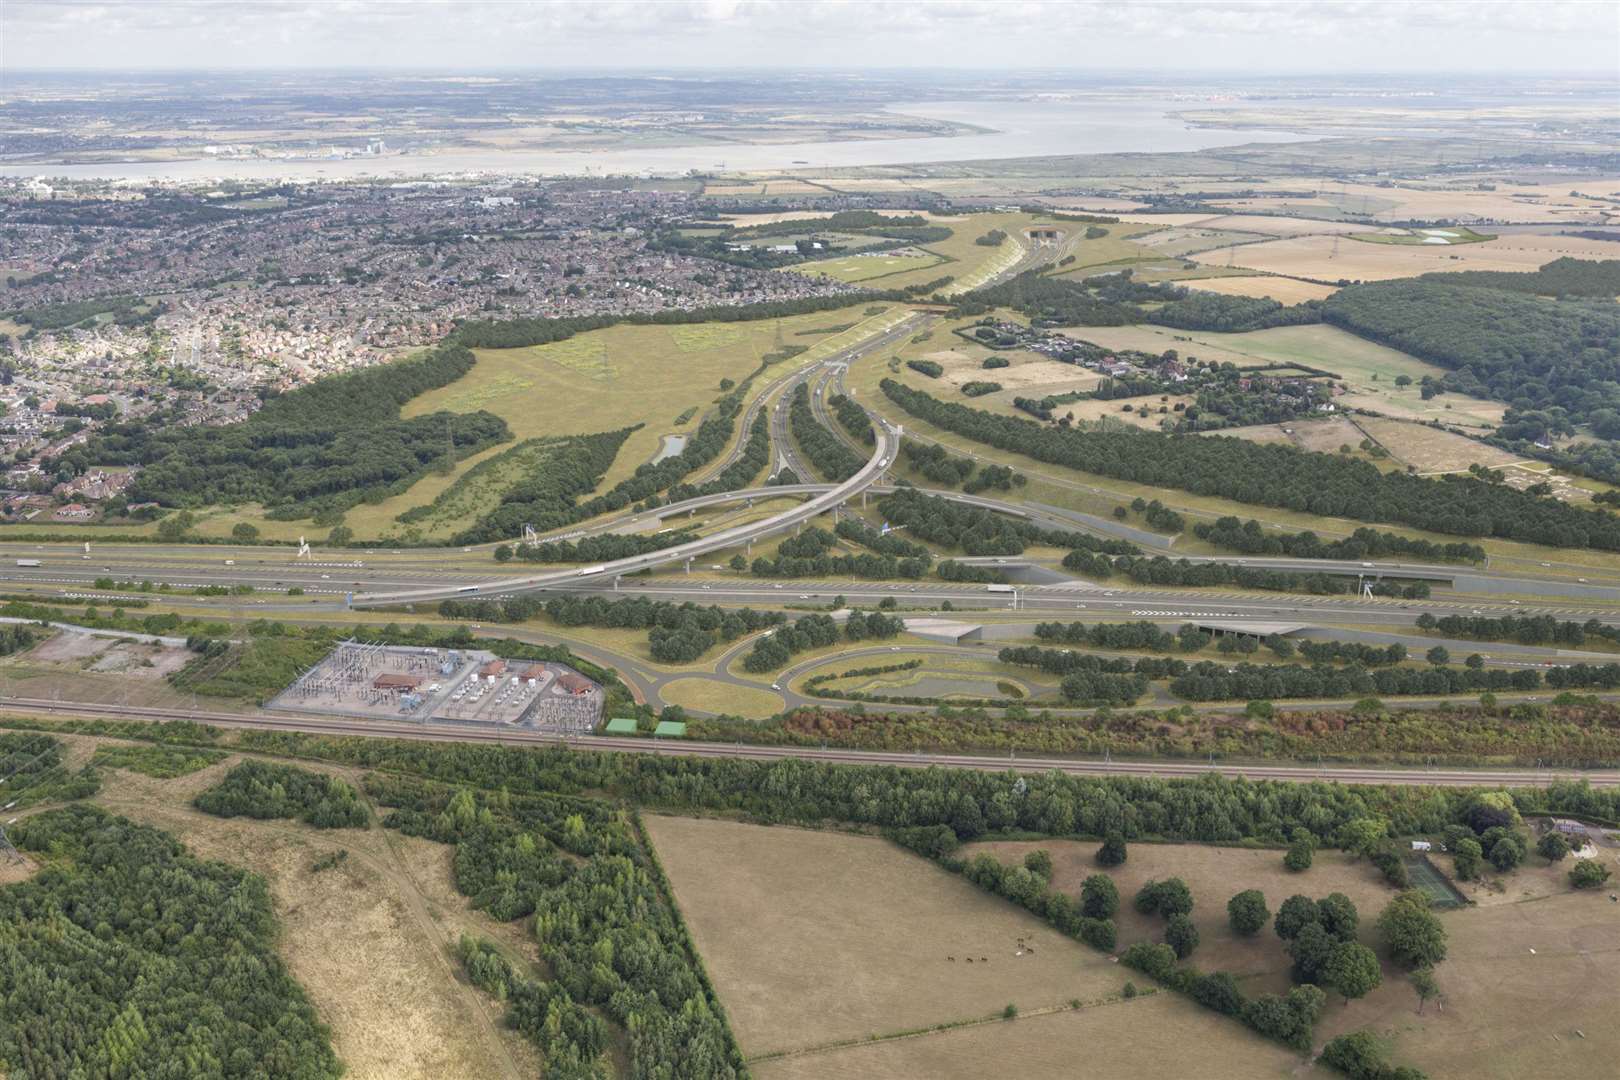 The proposed view looking north from the A2 to the Lower Thames Crossing. Picture: National Highways